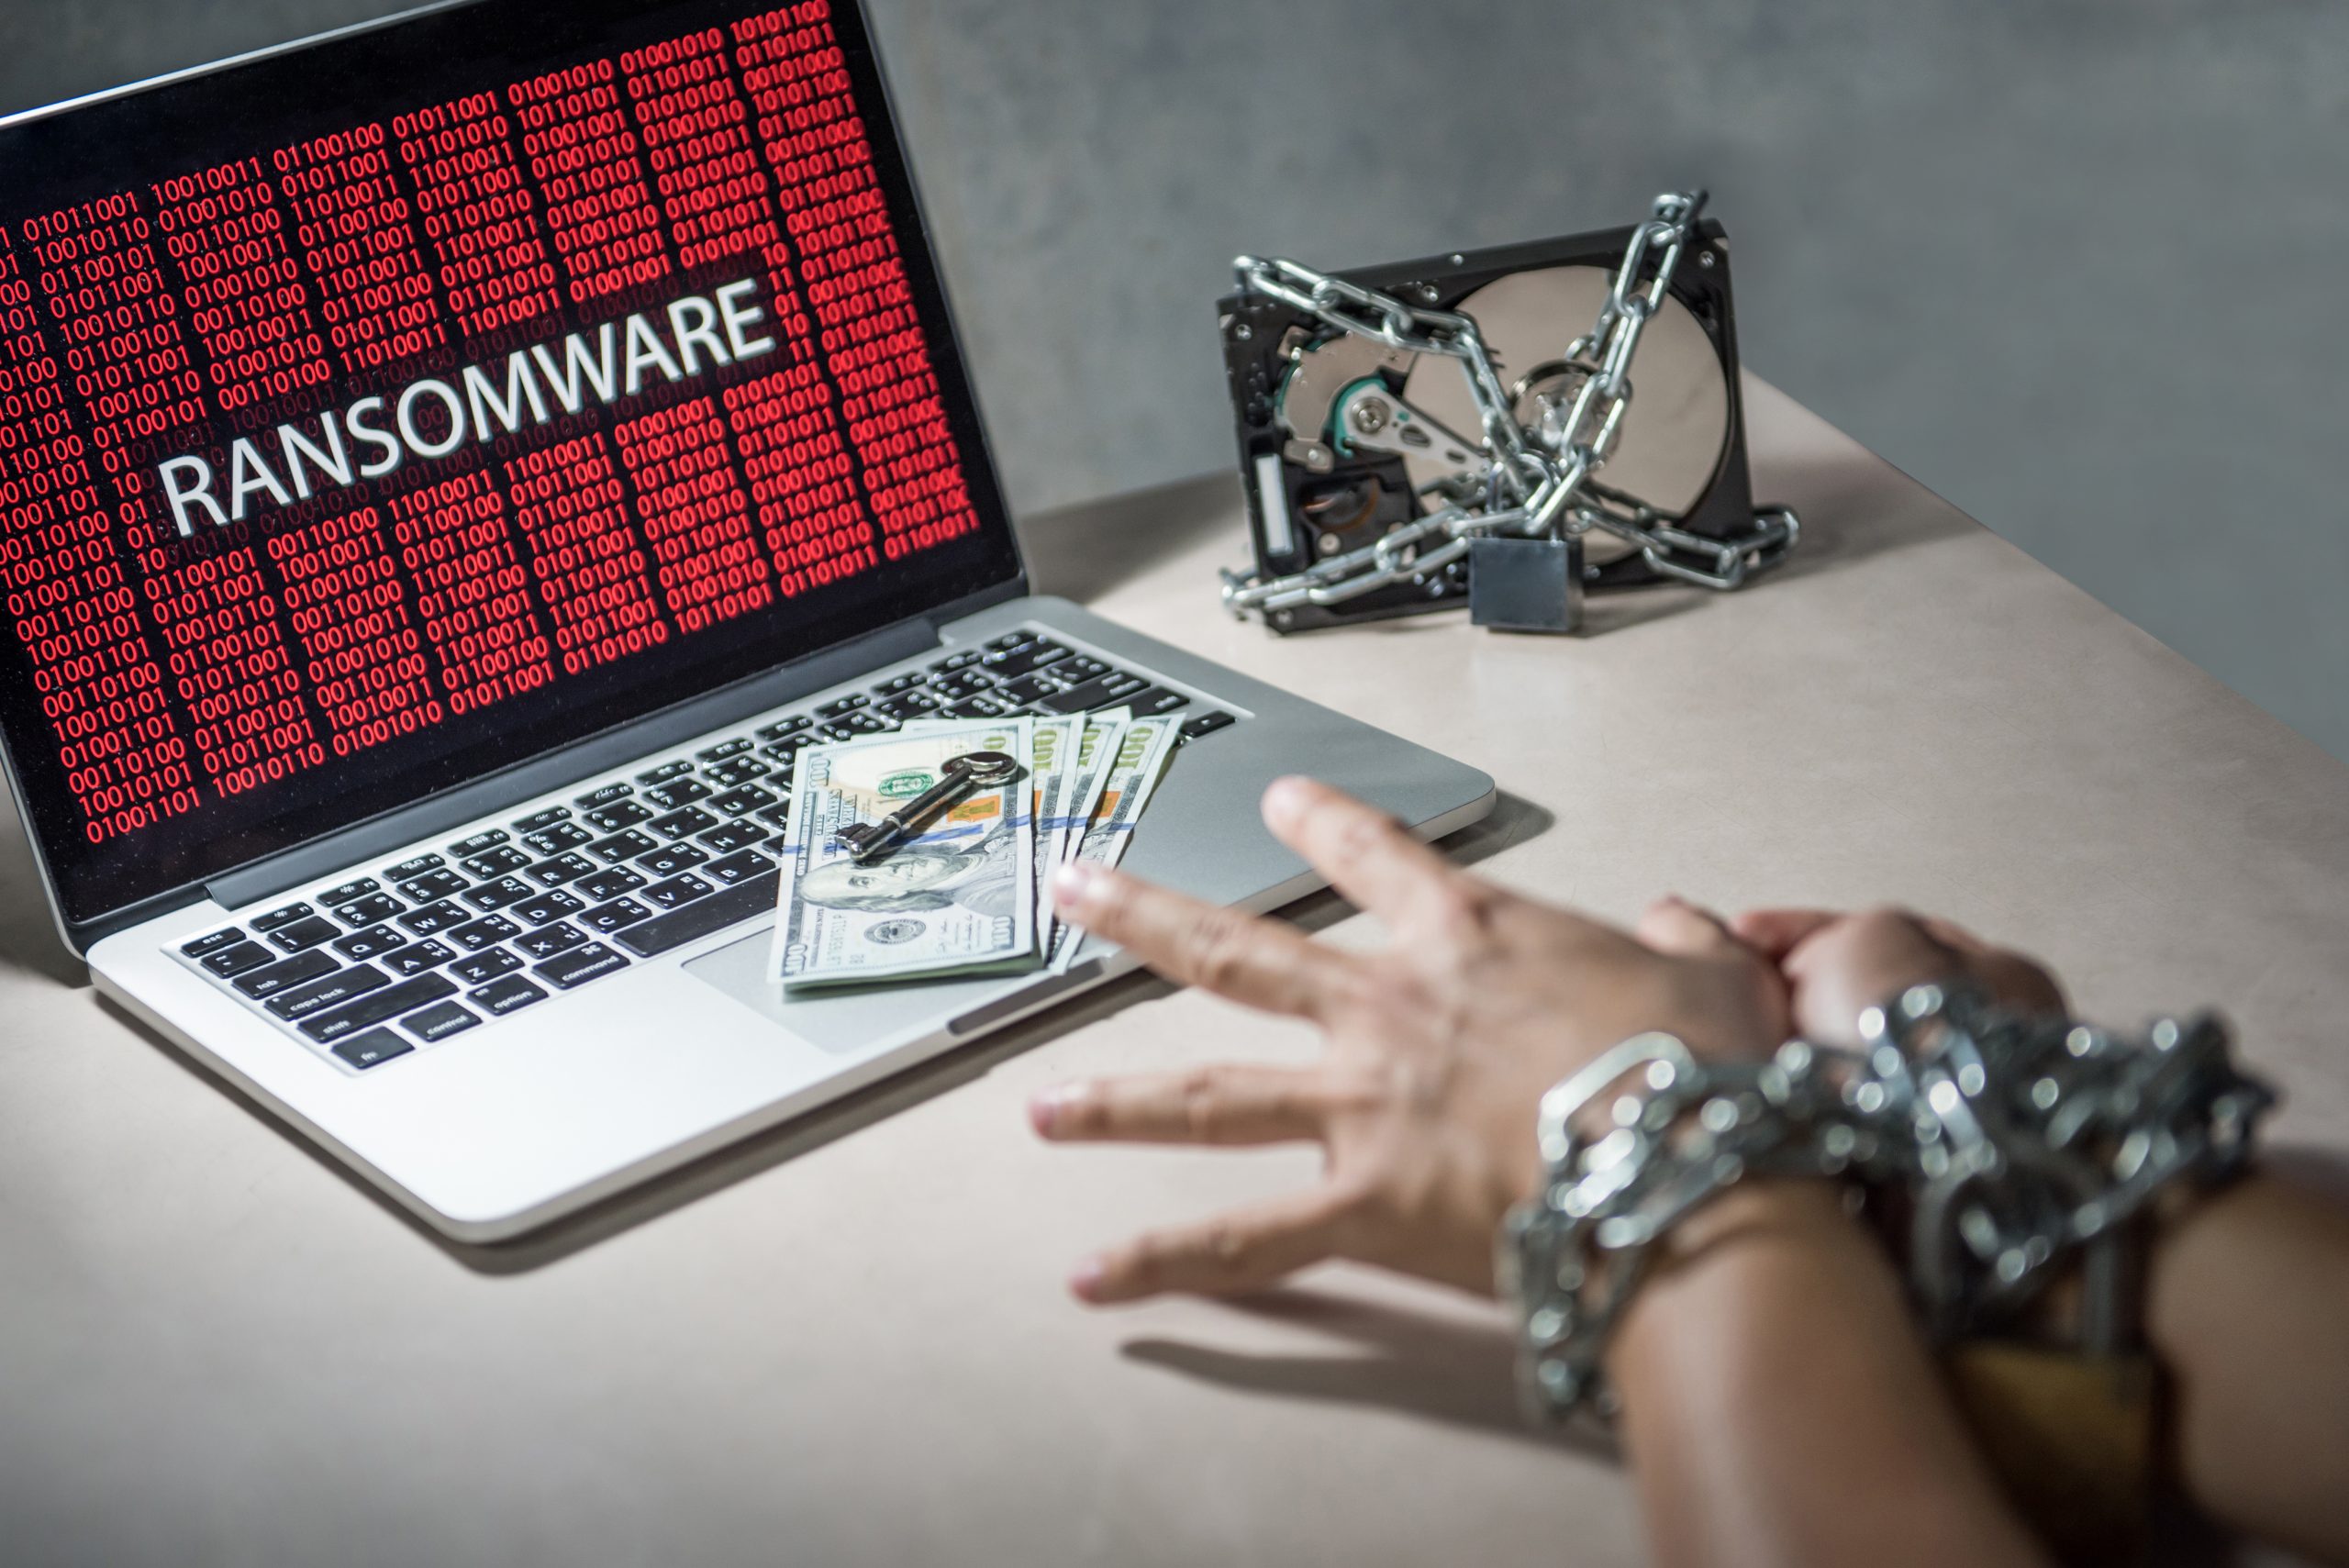 Device attacked by ransomware